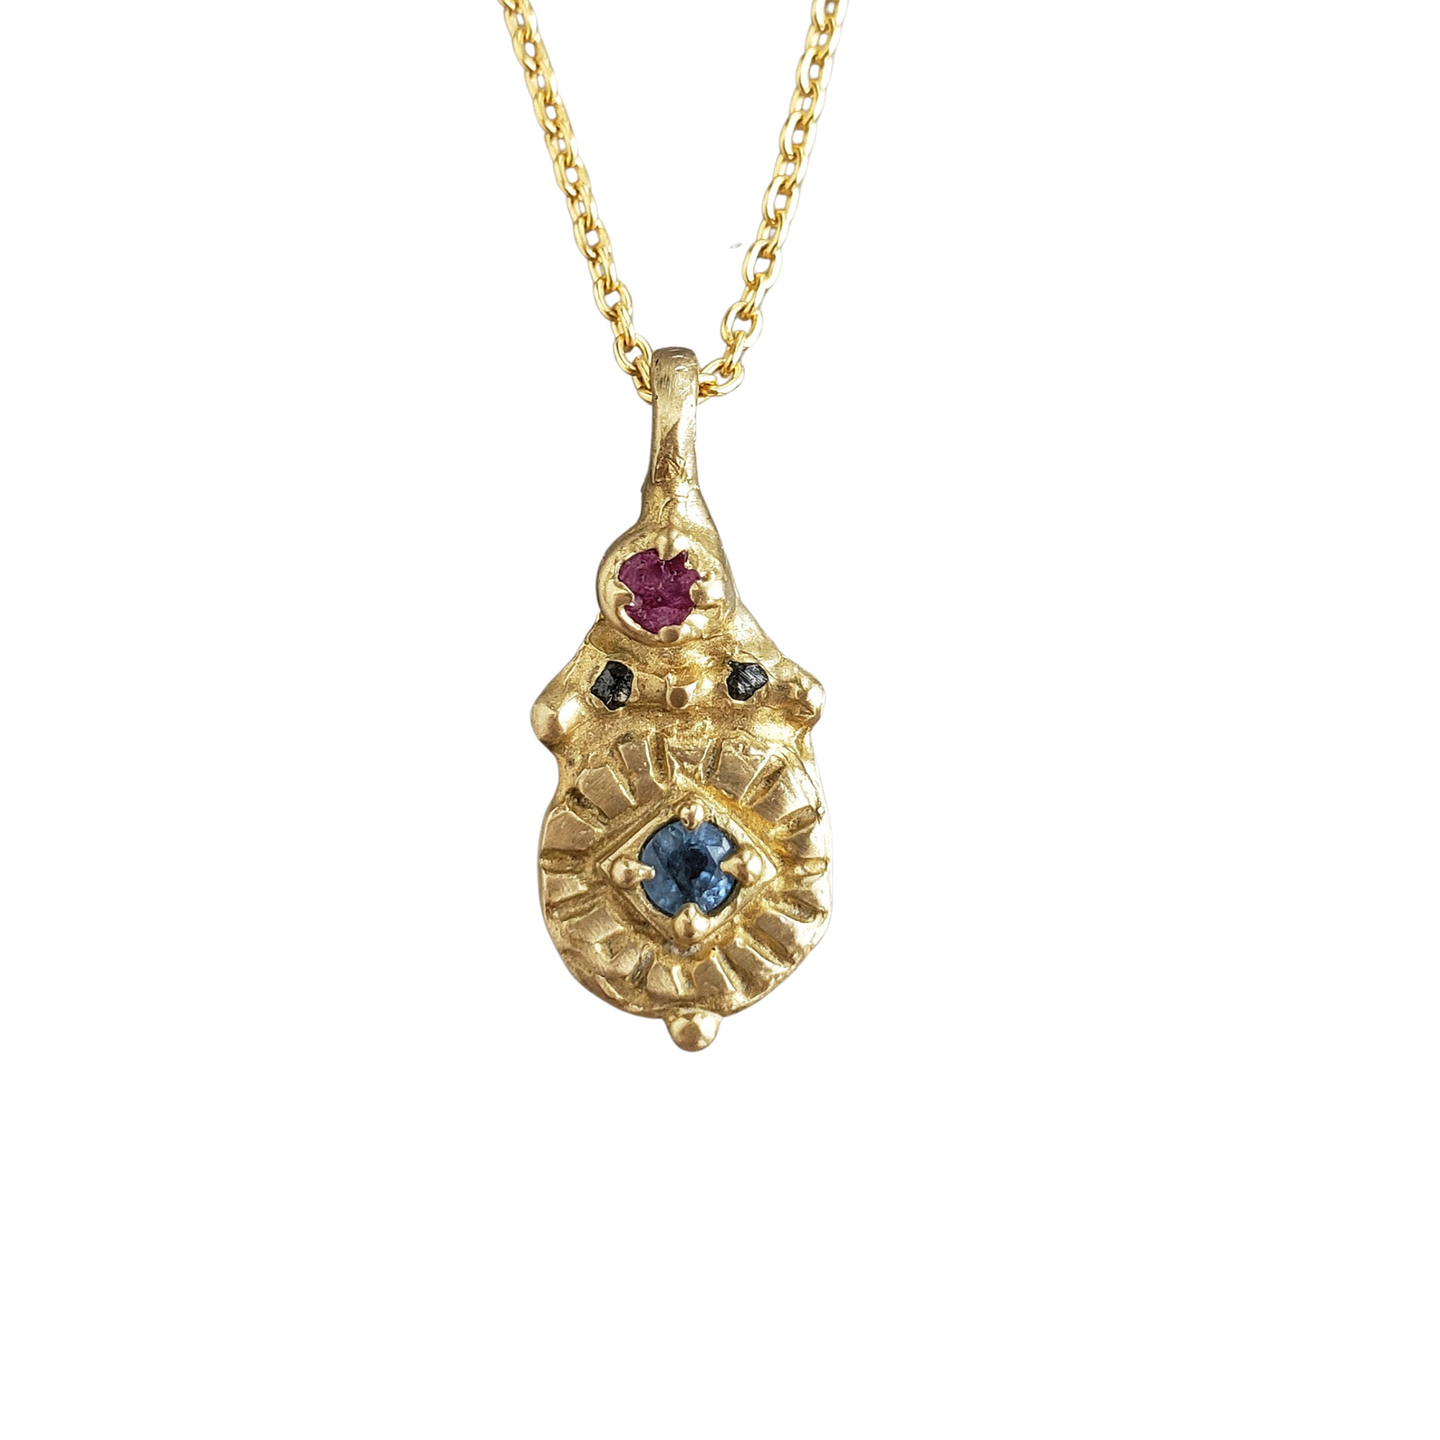 Sapphire, Ruby and Black Diamond Pendant in Bronze and Gold Filled Chain